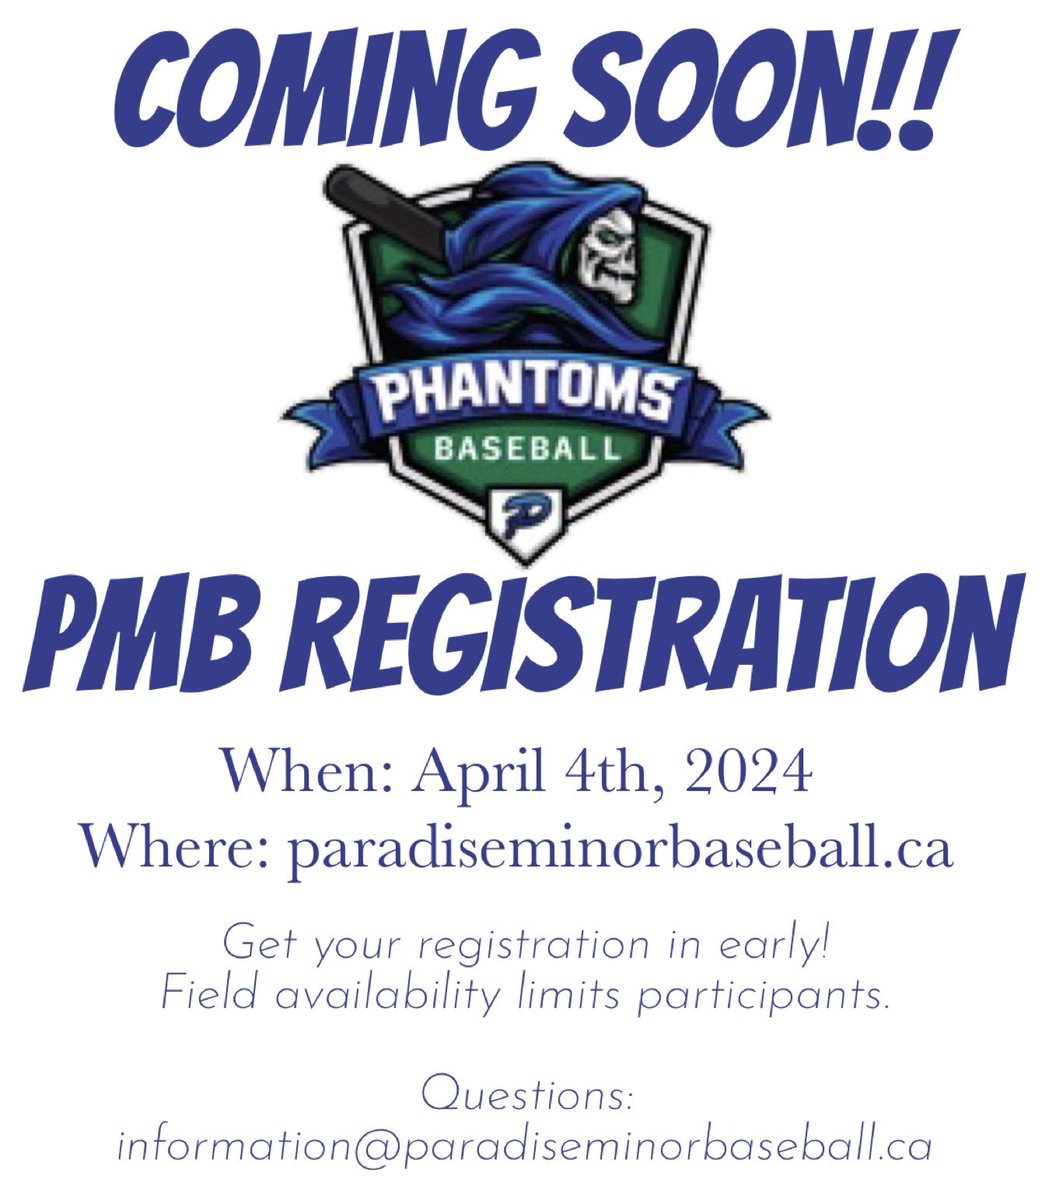 Paradise Minor Baseball registration will be open by Thursday, April 4th, so step up to the plate and secure your player’s spot! Please note that numbers are limited due to field availability, so don’t wait too long! Check out our website for all registration details on Thursday.